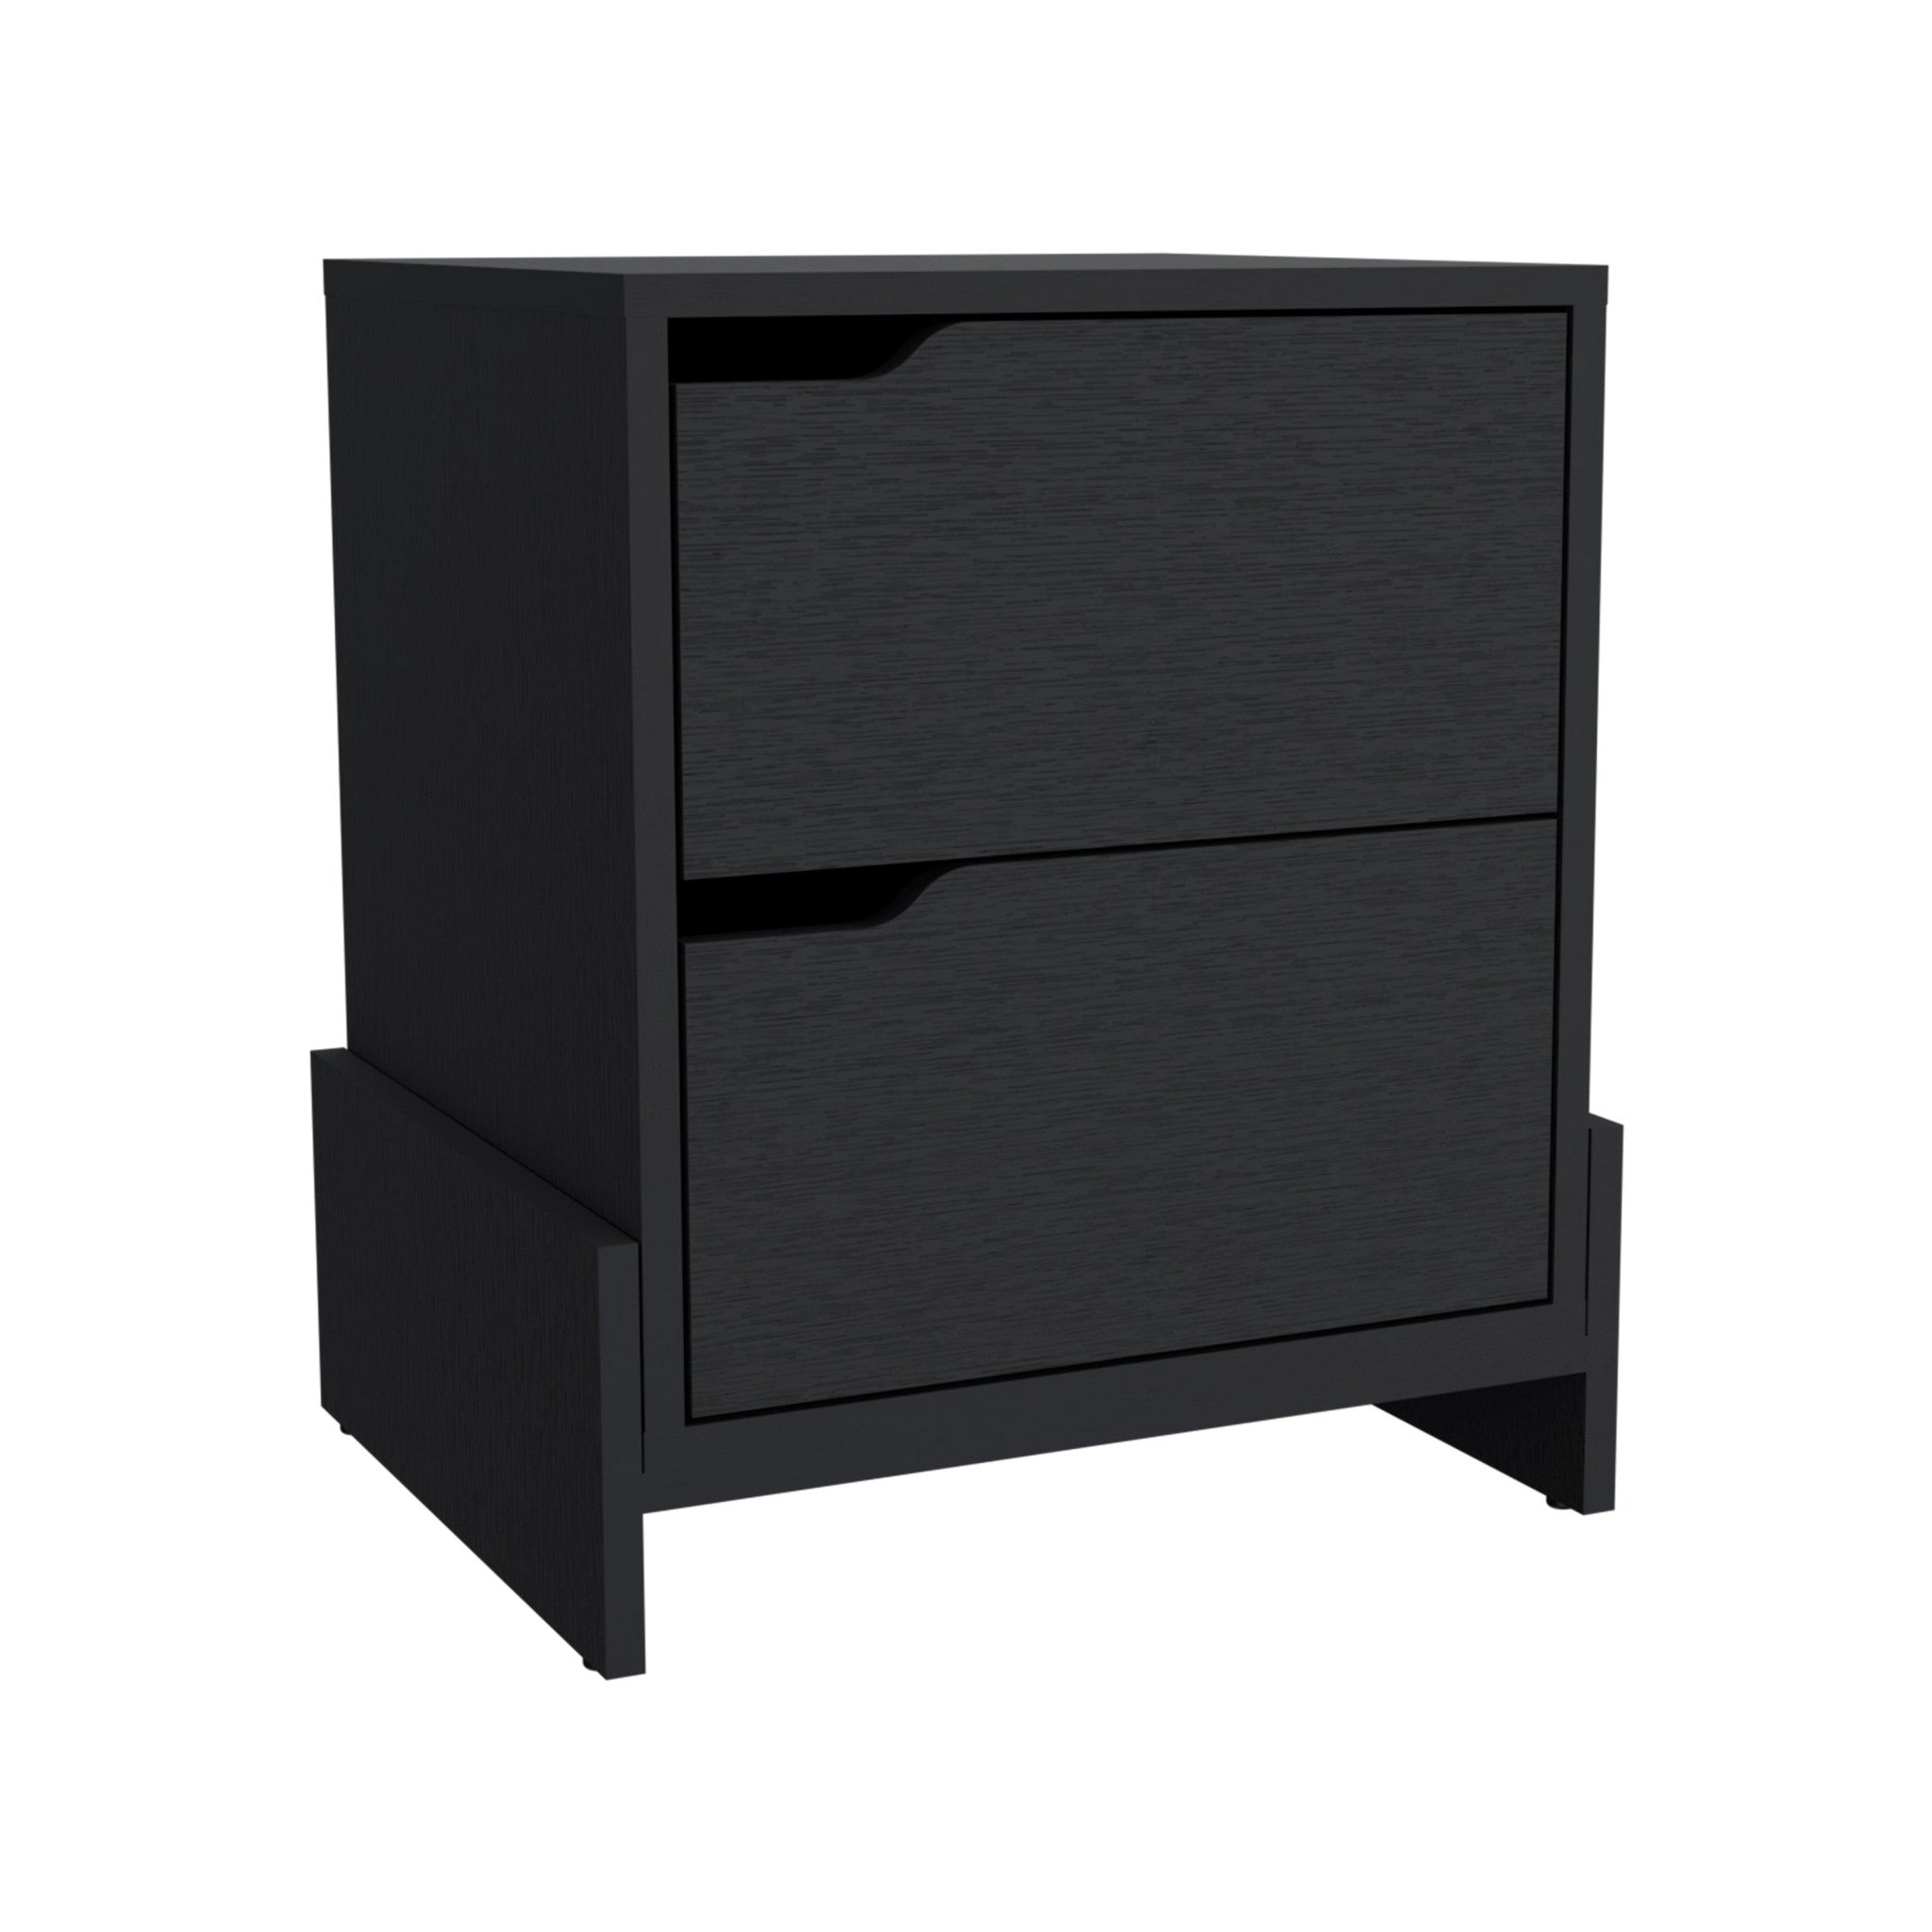 20" Black Two Drawer Faux Wood Nightstand